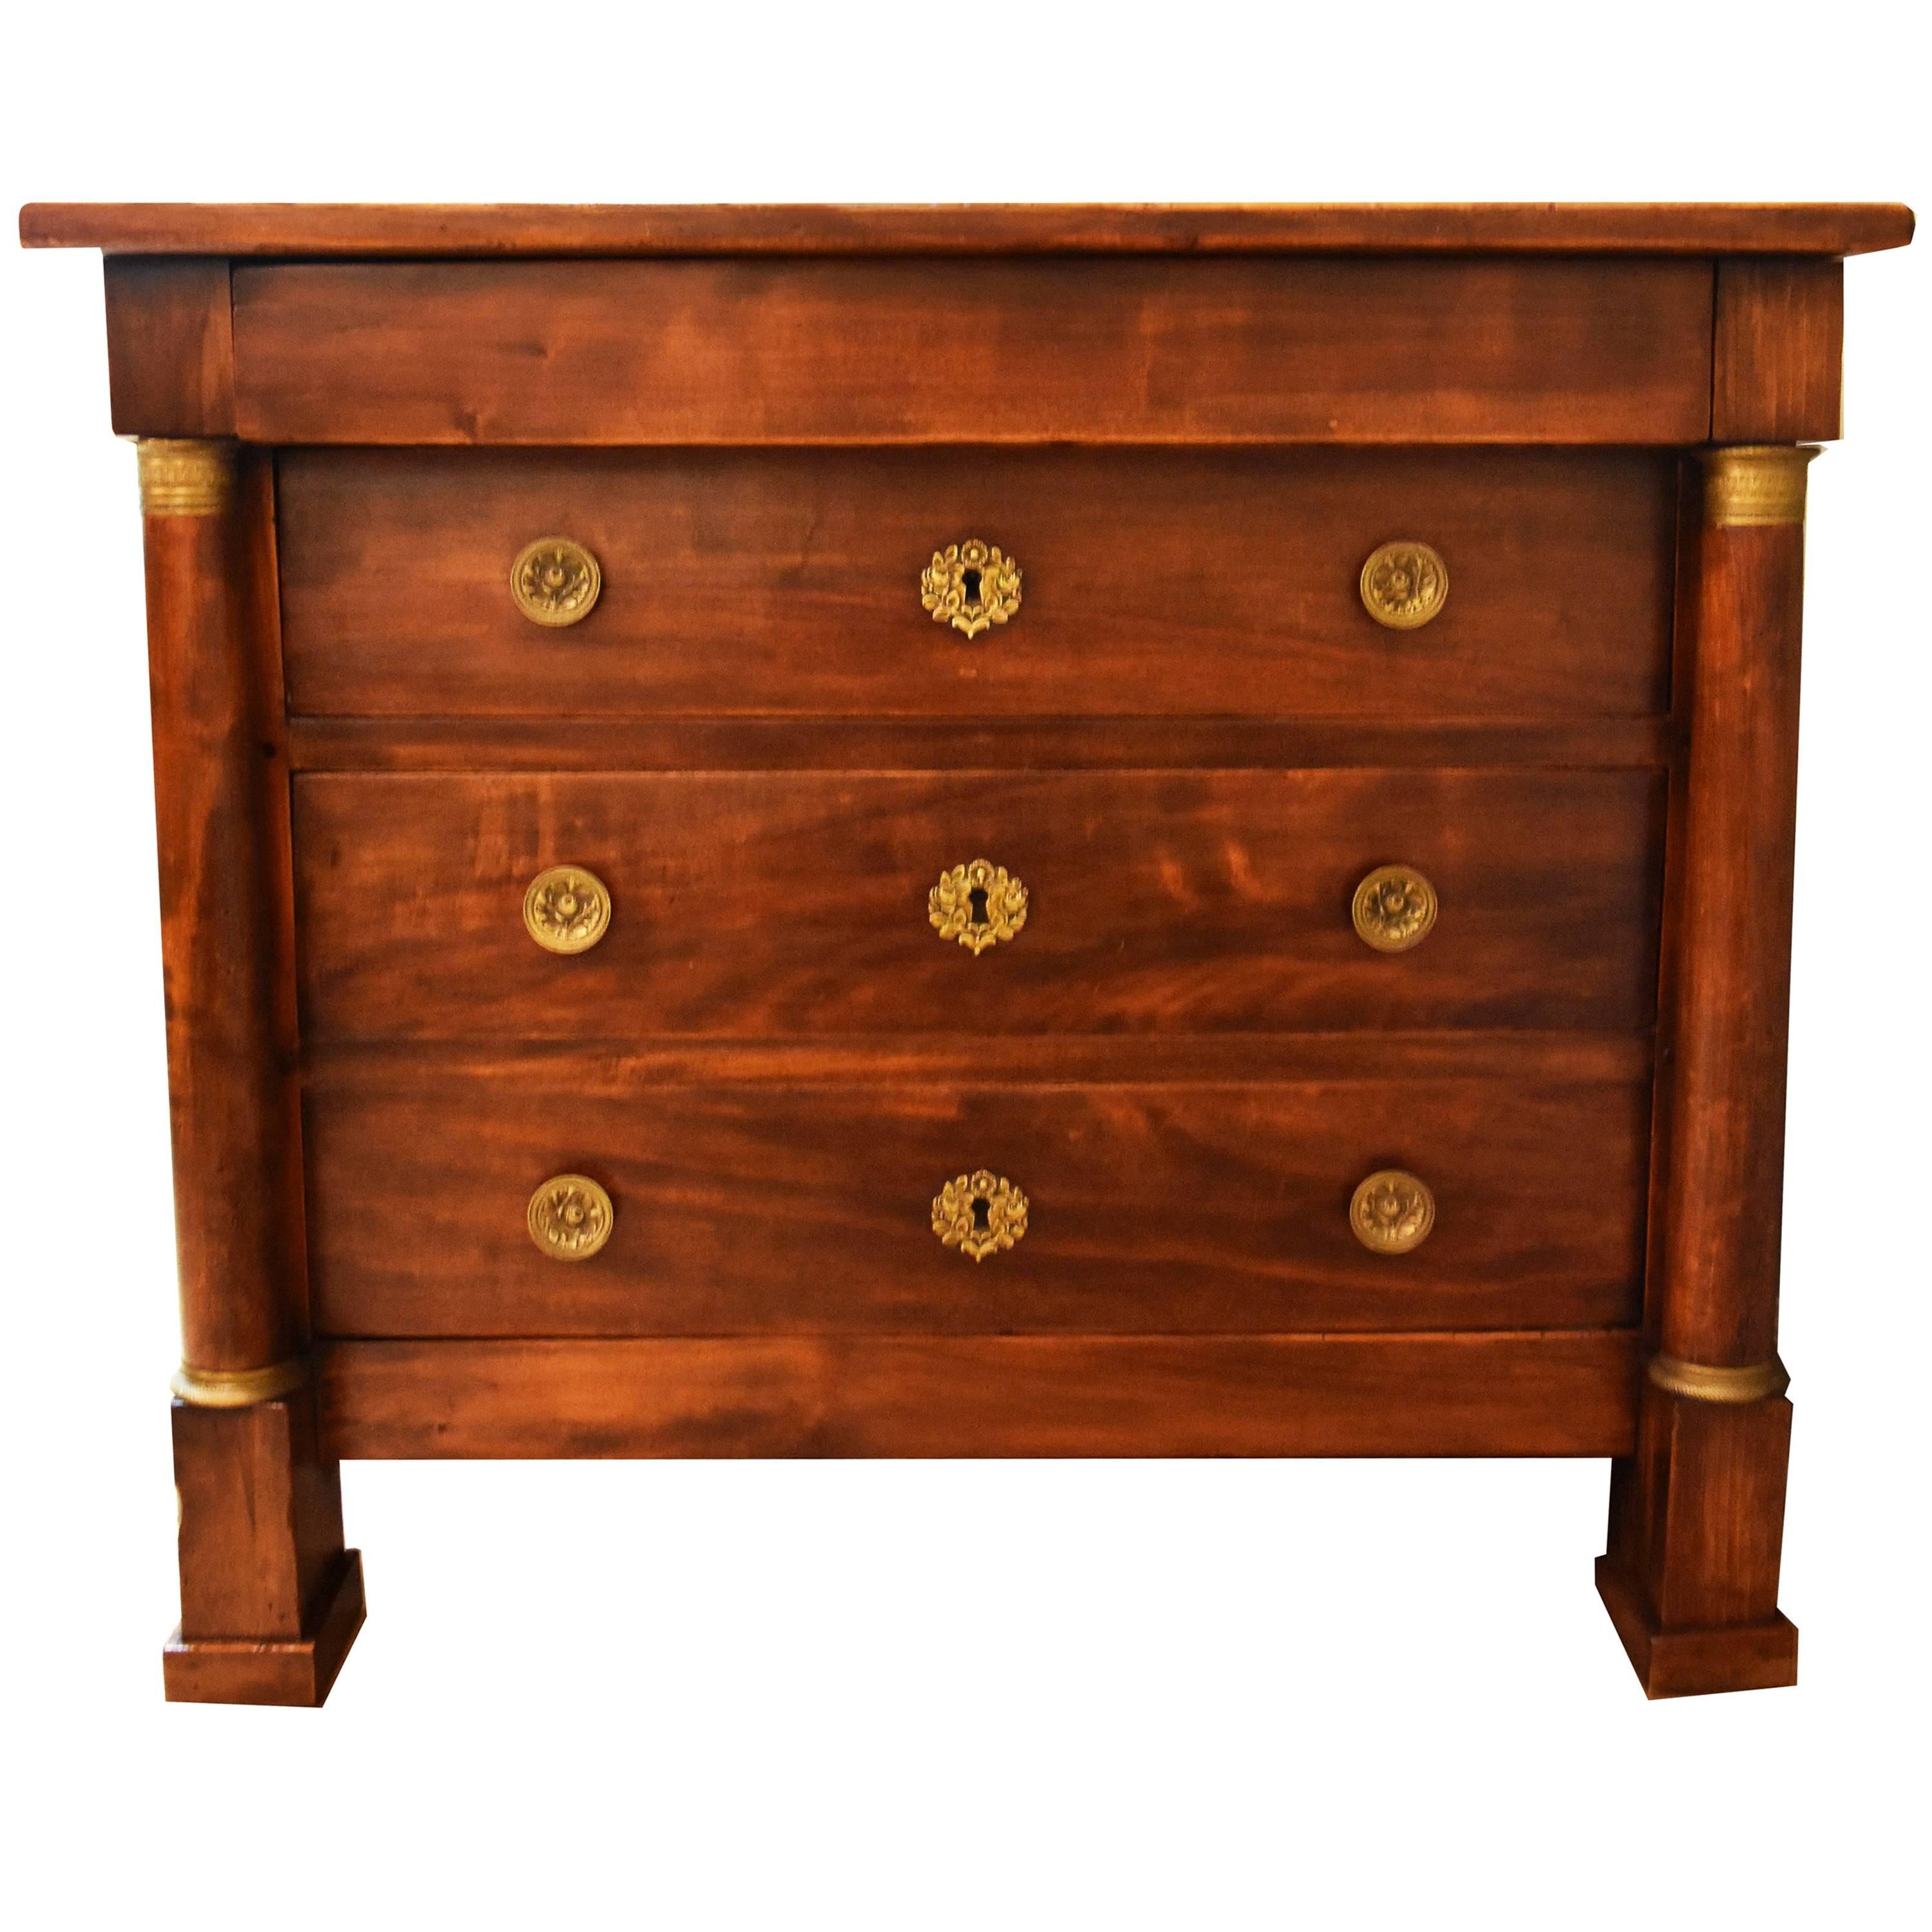 19th Century Small French Empire Chest of Drawers